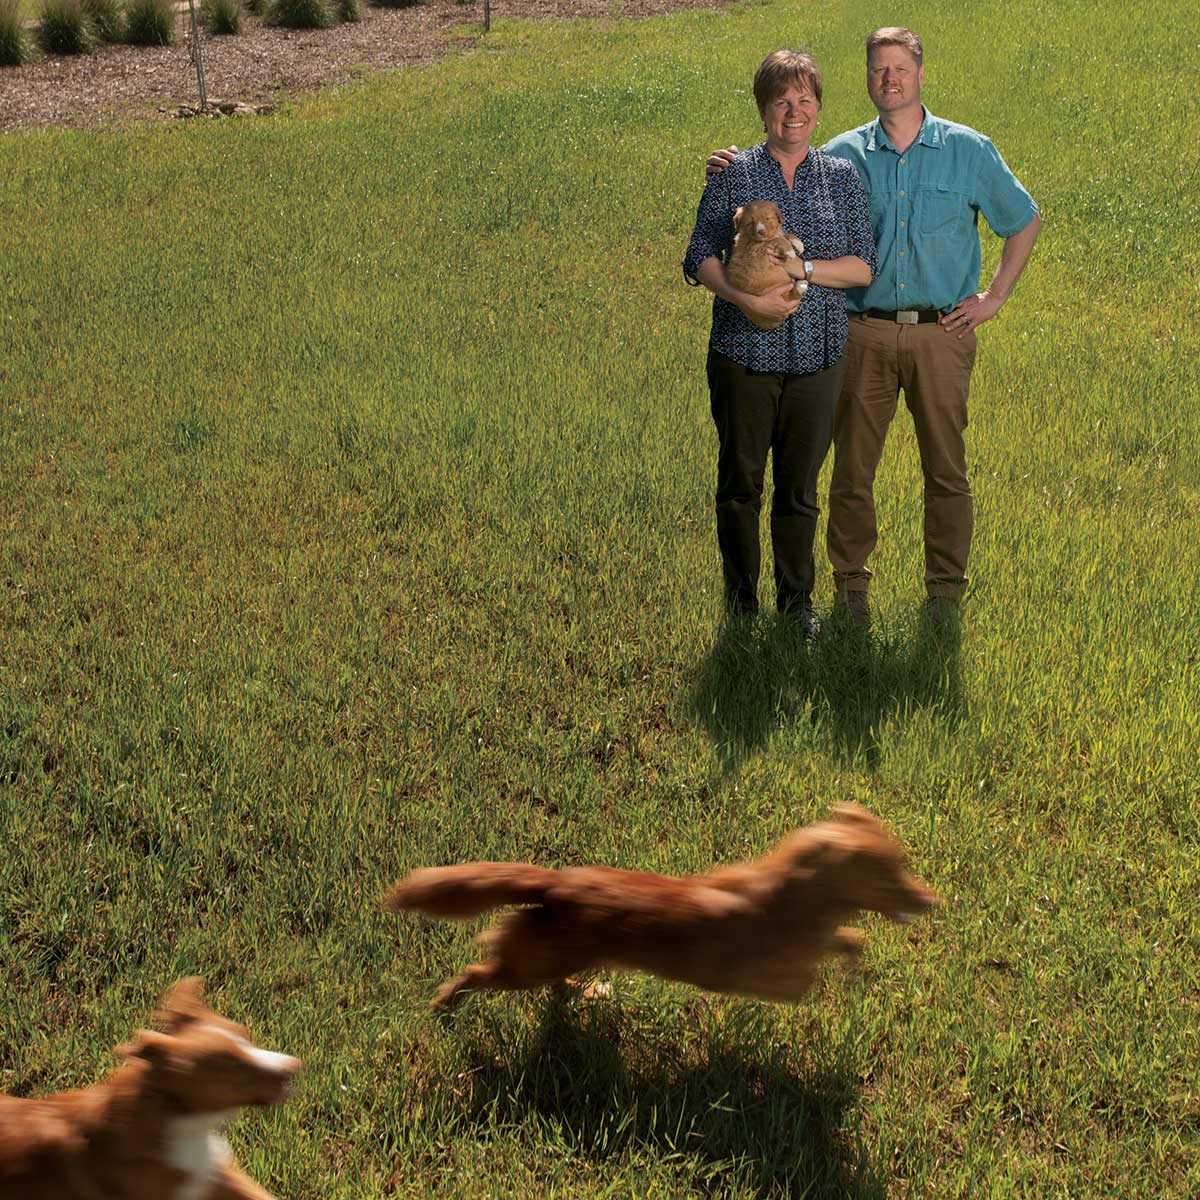 Danika and Mike Bannasch on their farm with their dogs